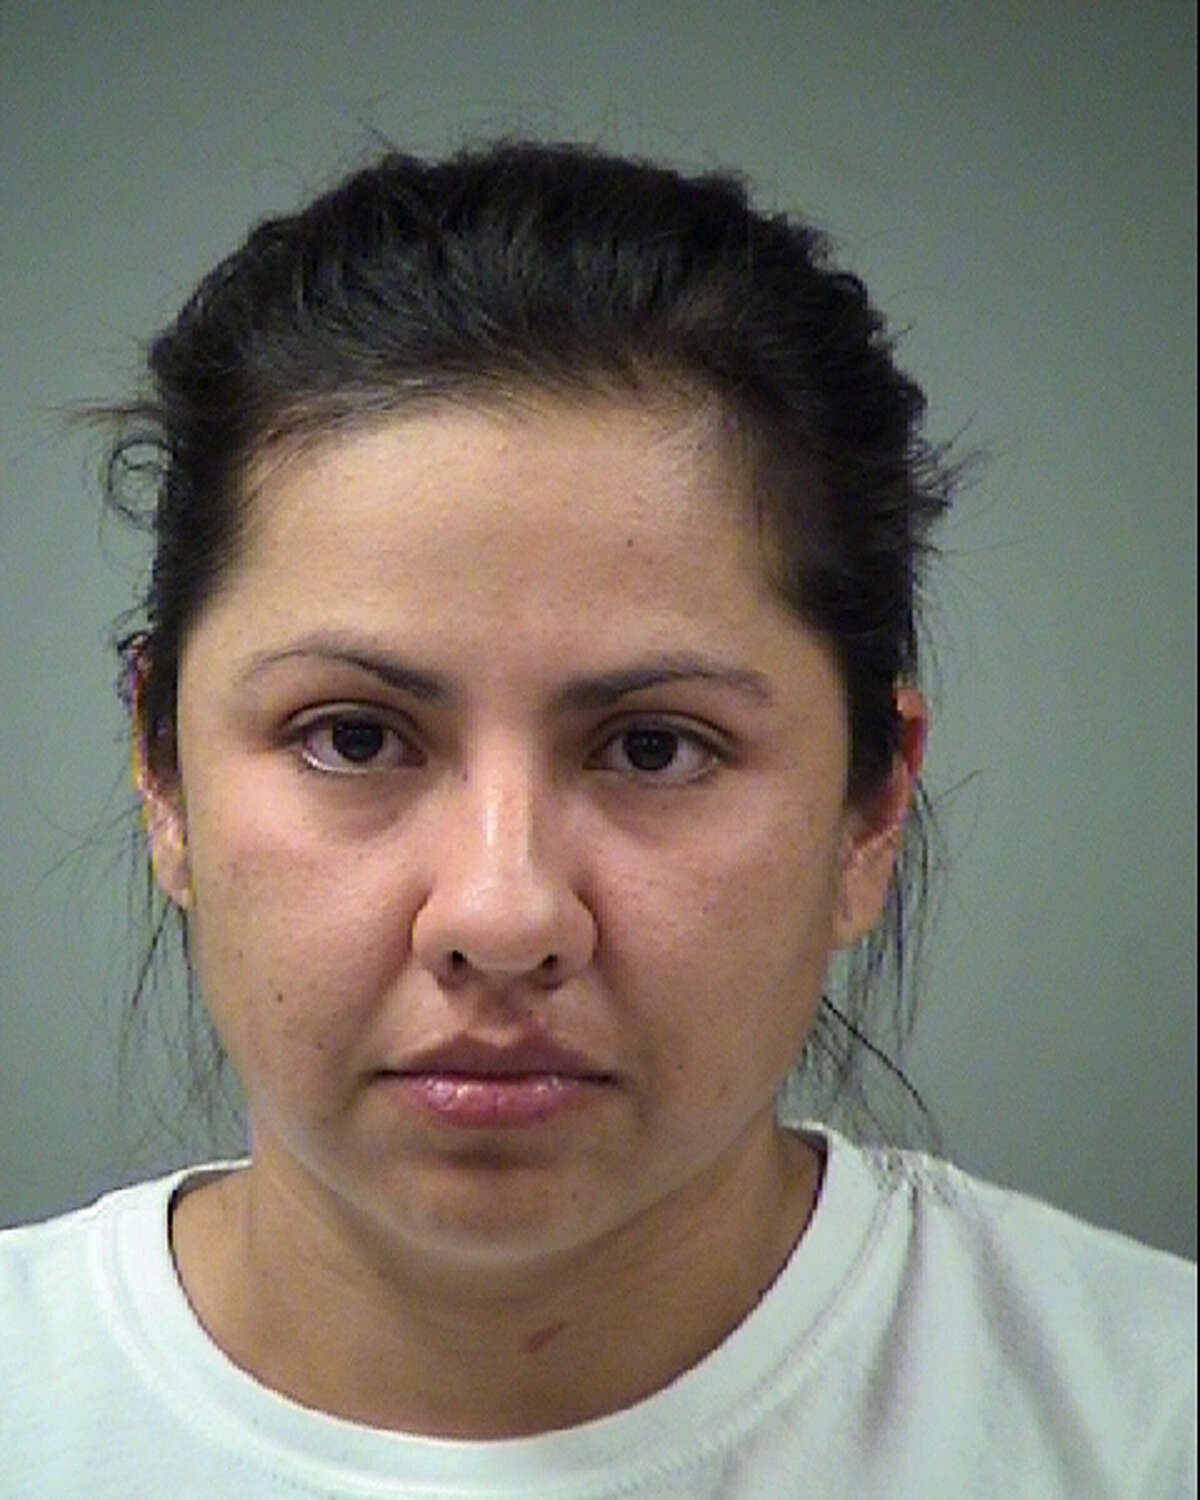 Krystal Borrego, a Bexar County detention officer, was arrested on a charge of driving while intoxicated in October 2017. She was booked into the Bexar County Jail on a $1,000 bond.